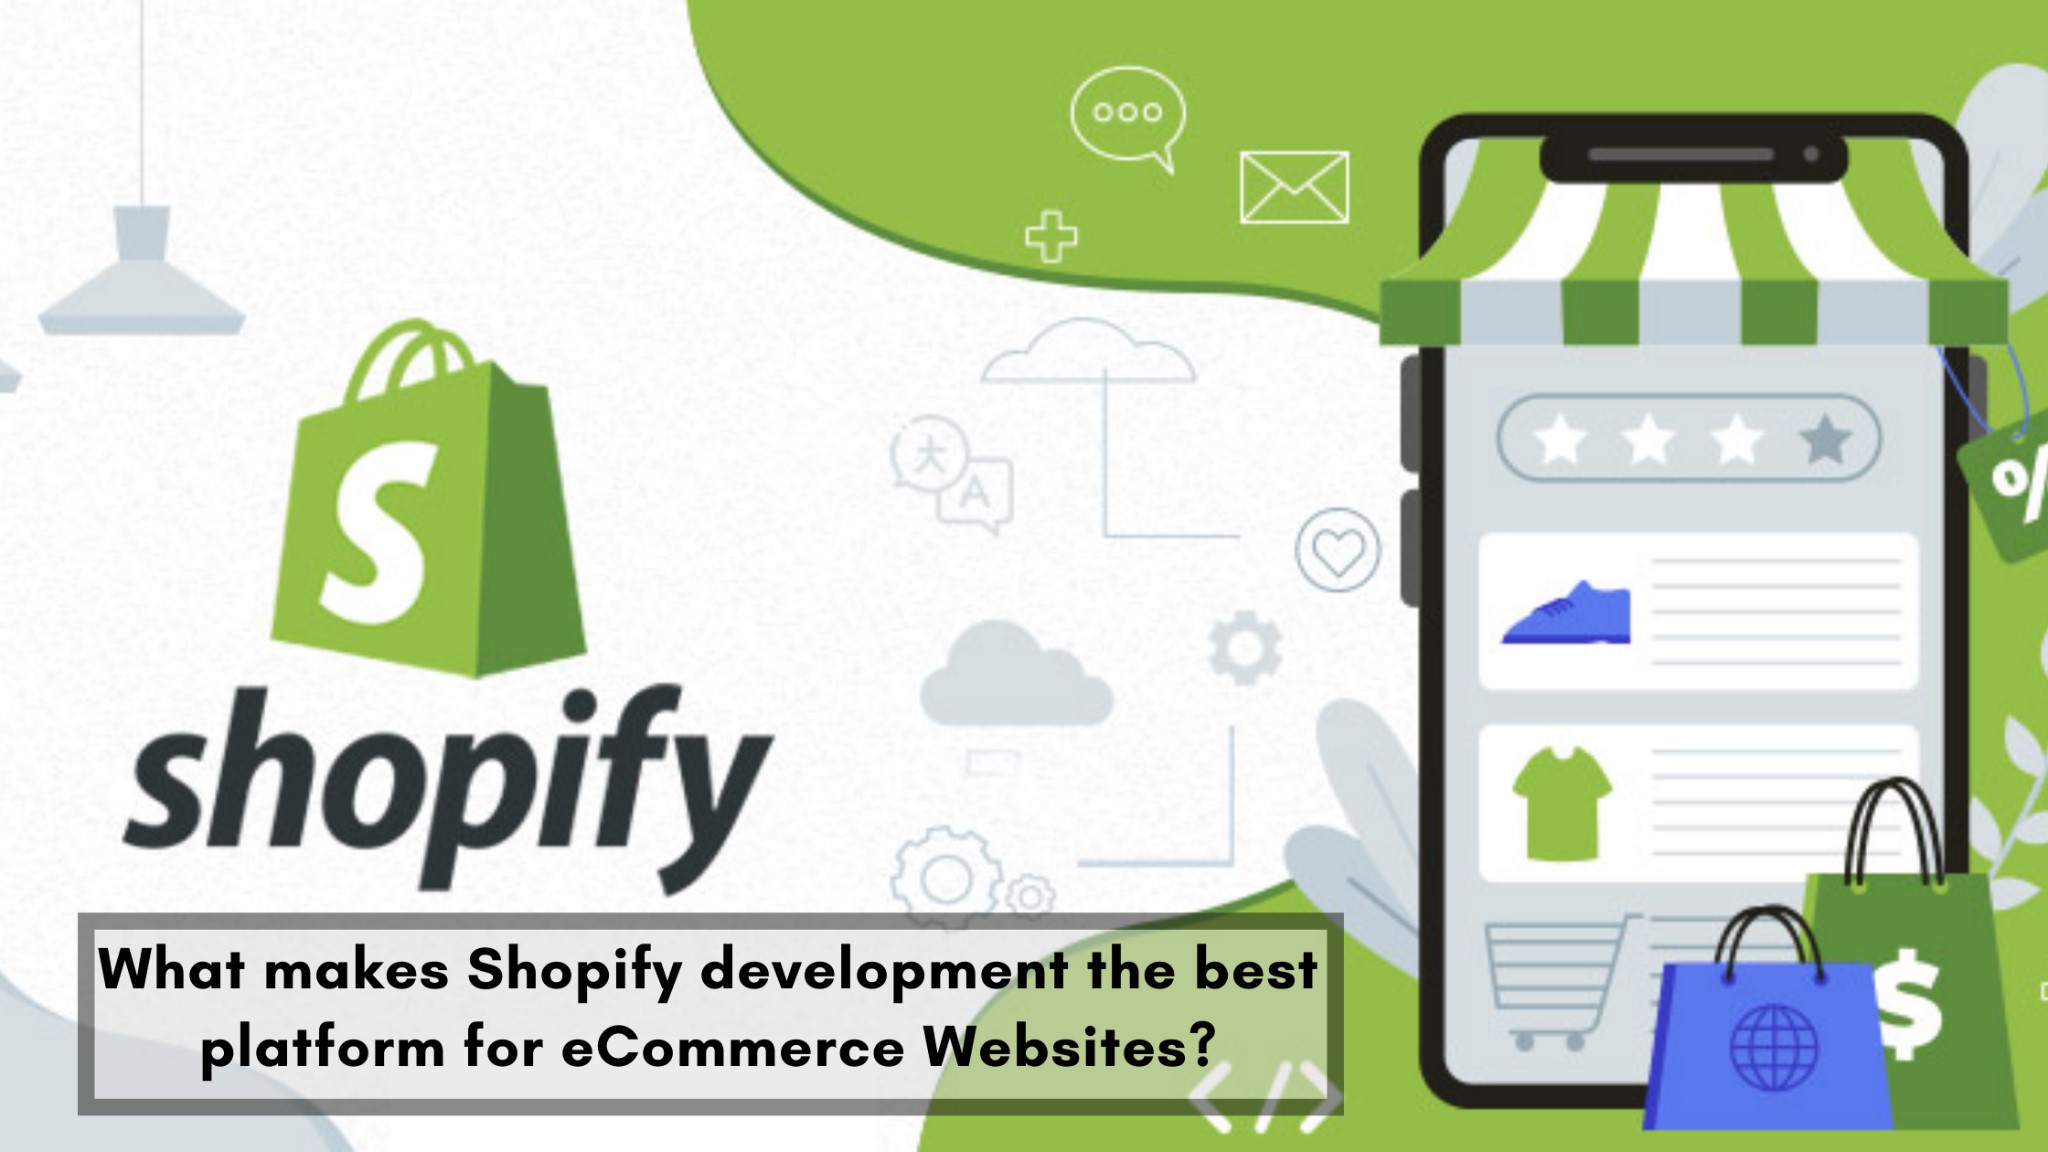 Things that make Shopify the best platform